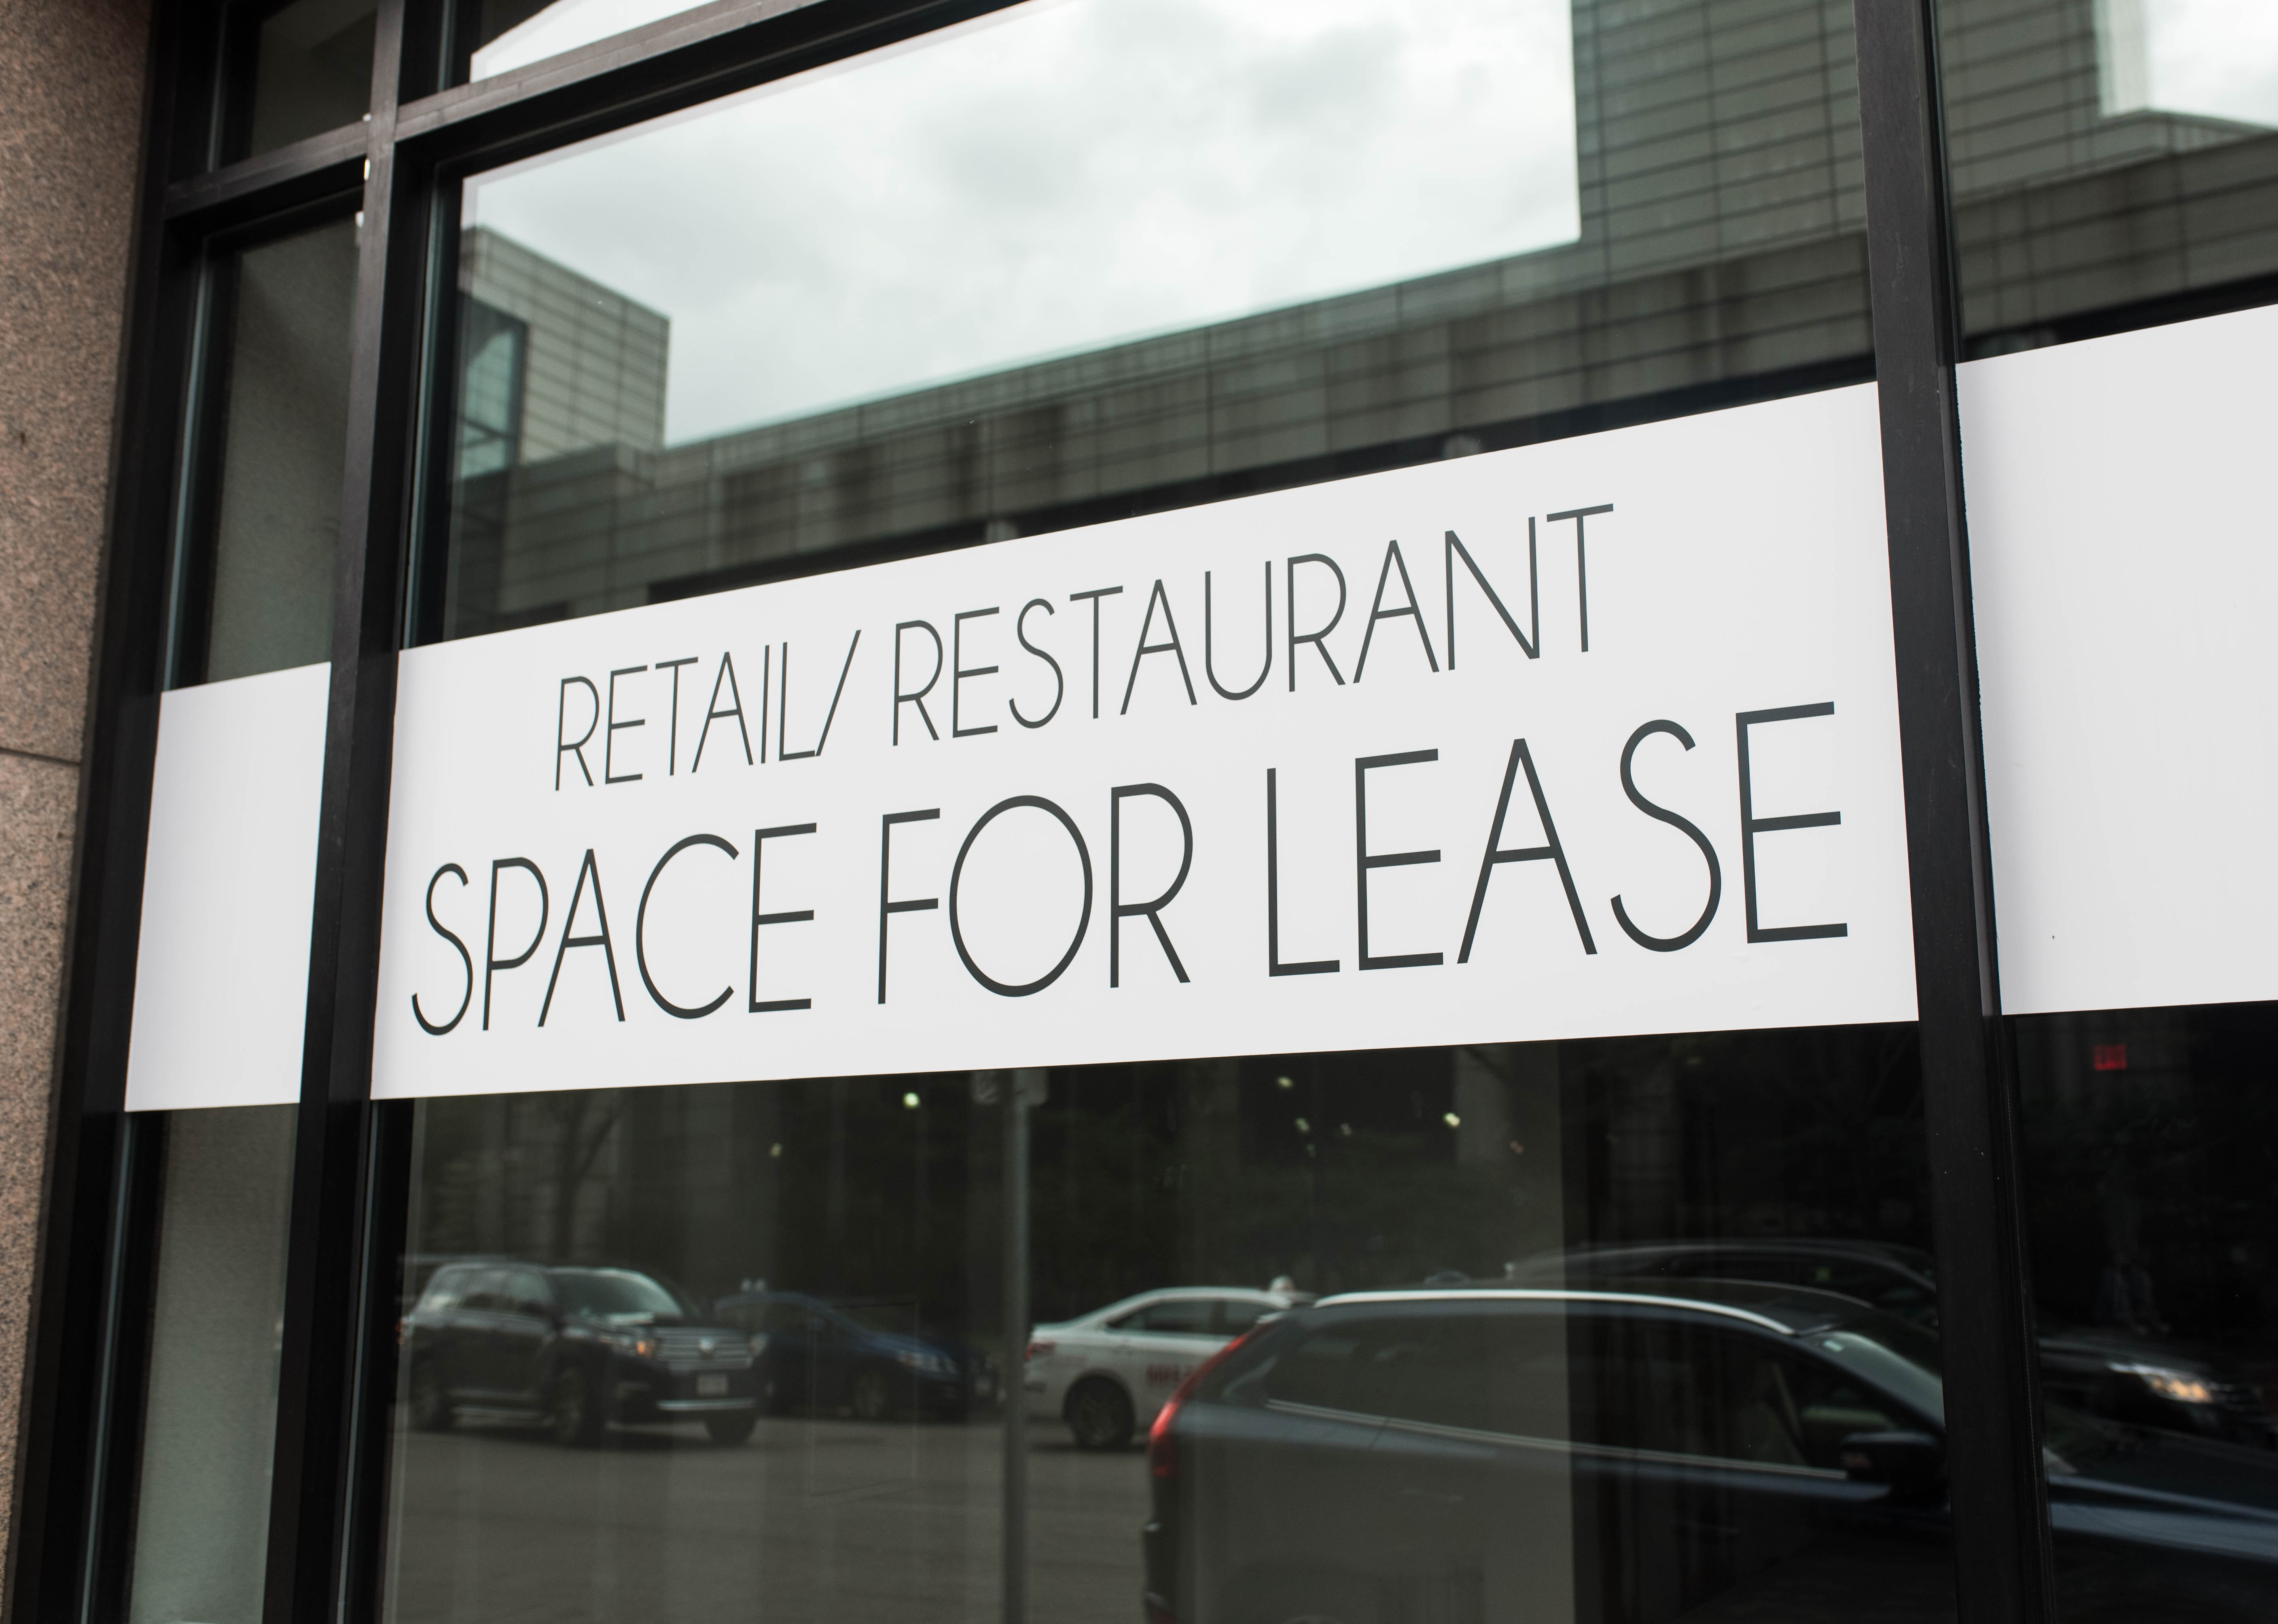 Custom real estate signage that says retail/restaurant space for lease